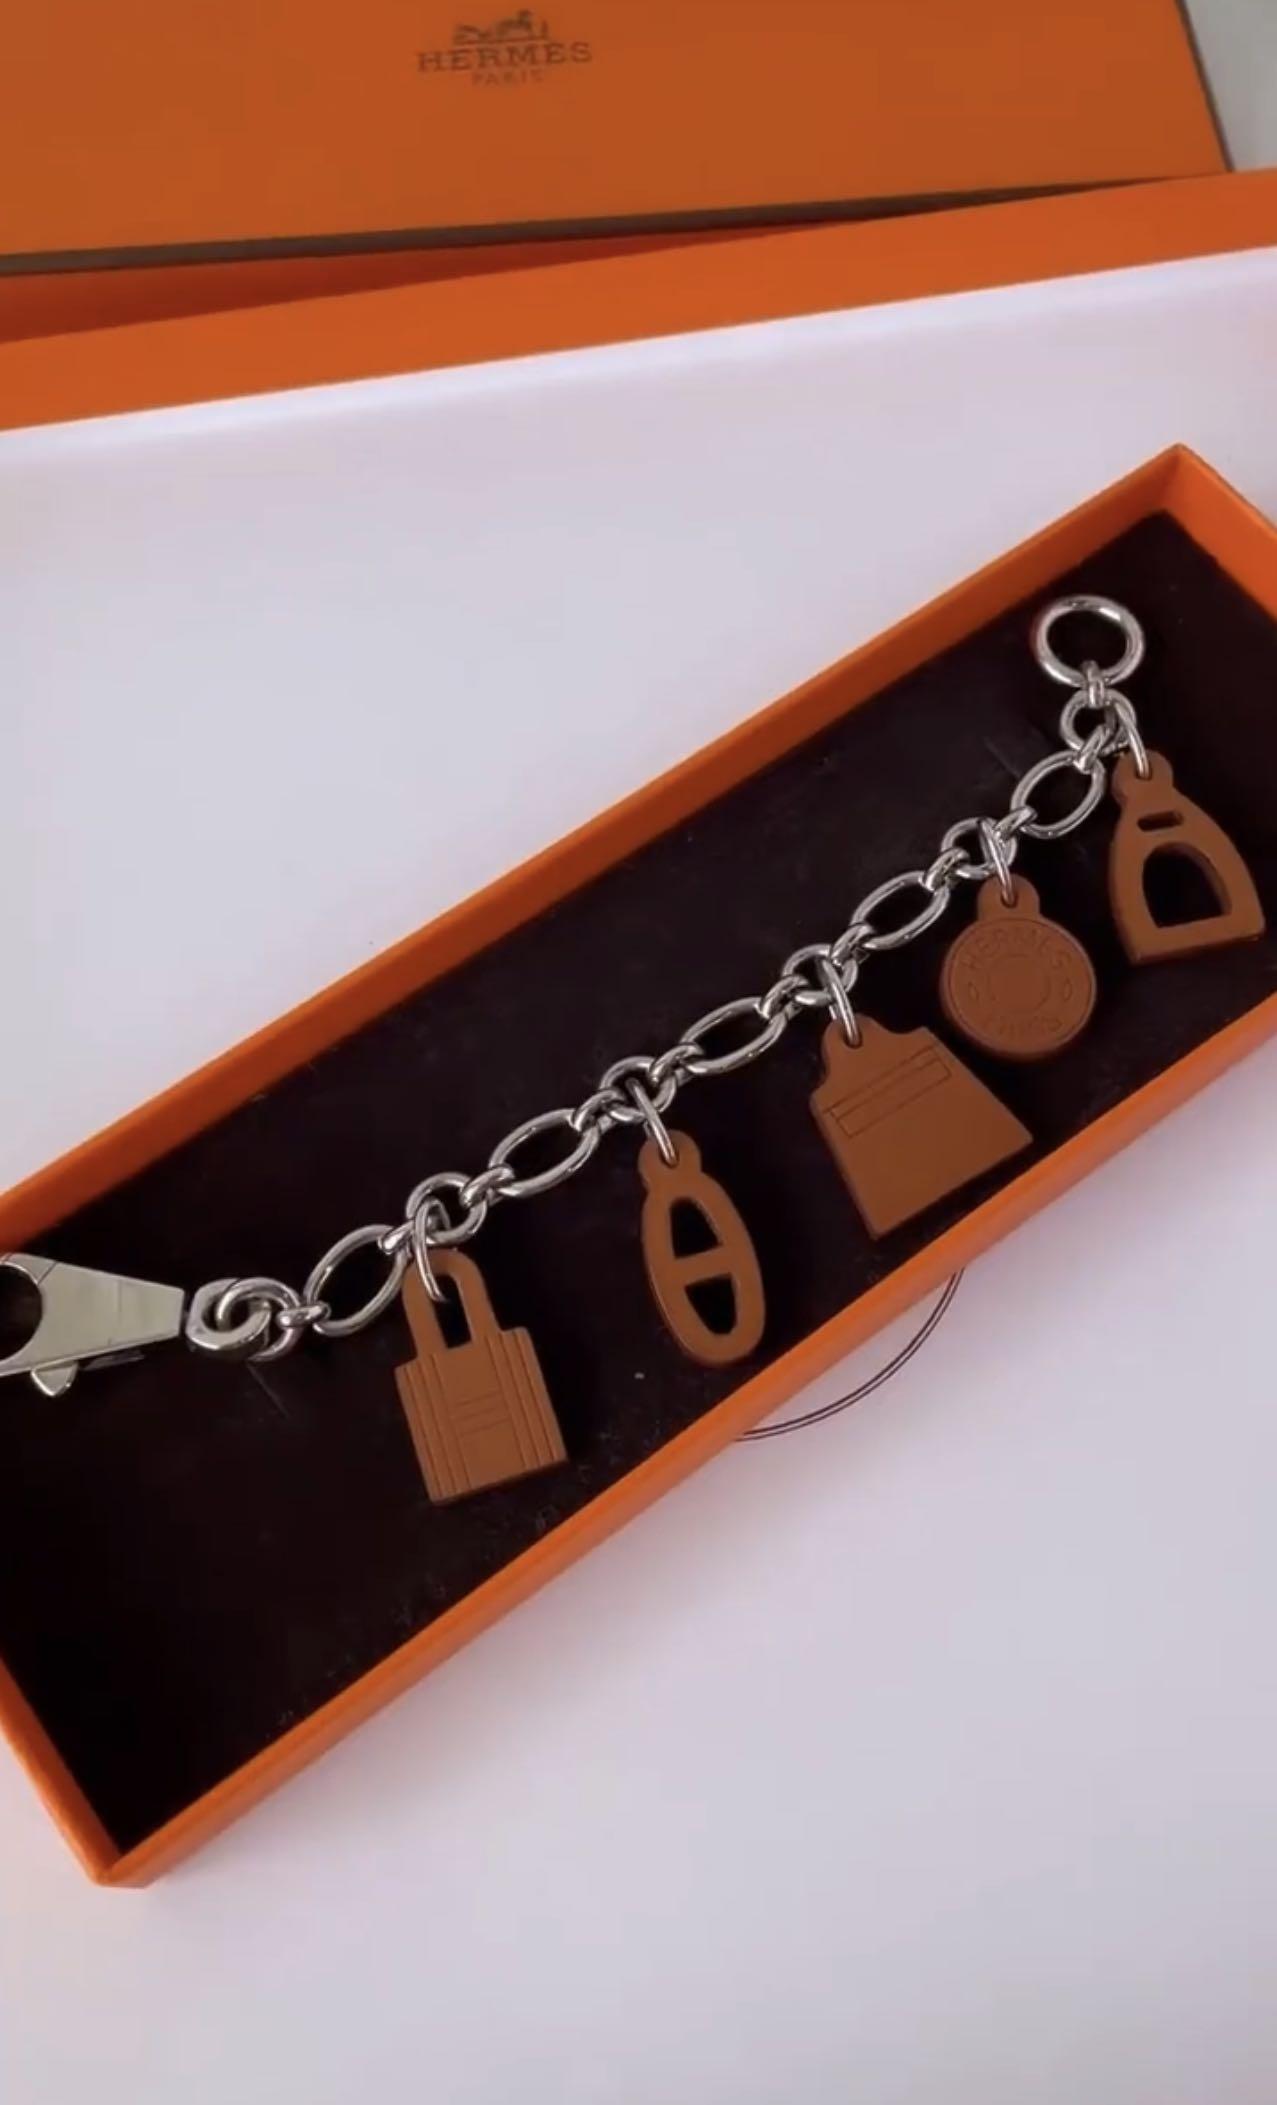 Bag charm Hermès Olga Silver from 100% authentic materials!